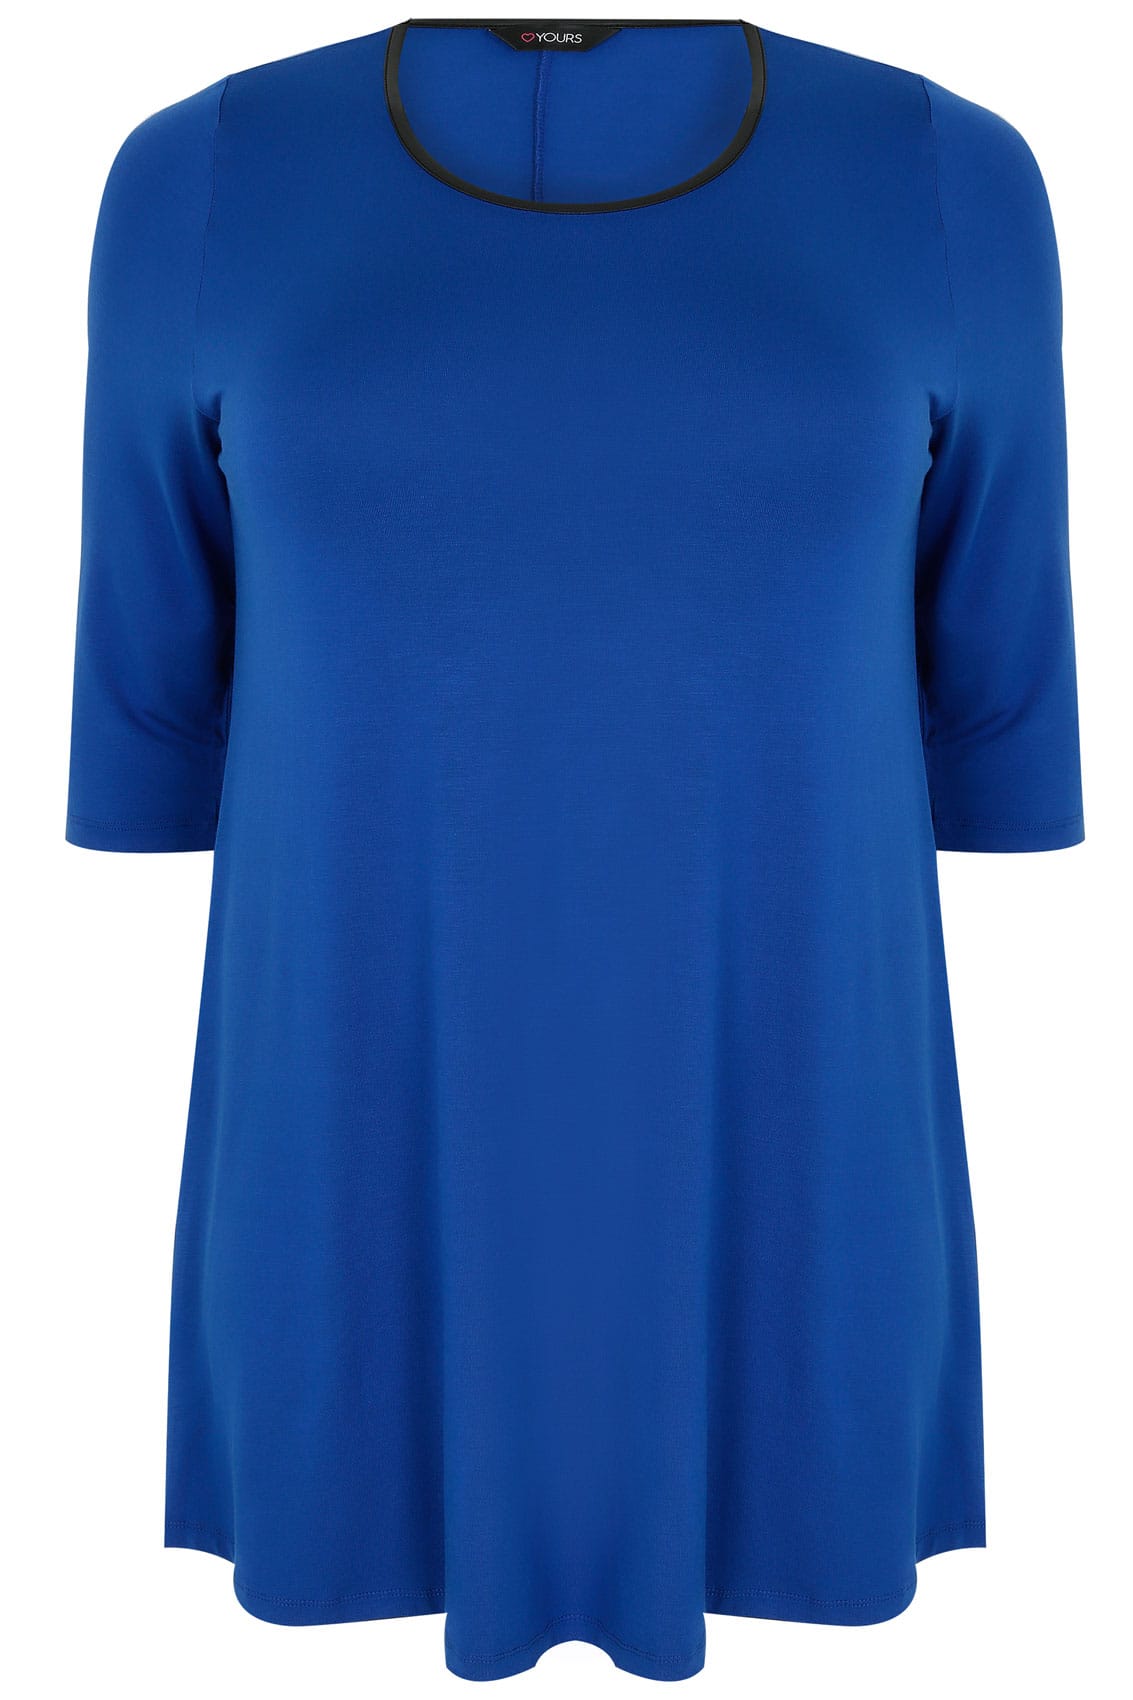 Cobalt Blue Longline Jersey Swing Top With Pu Trim And Half Sleeves Plus Size 16 To 36